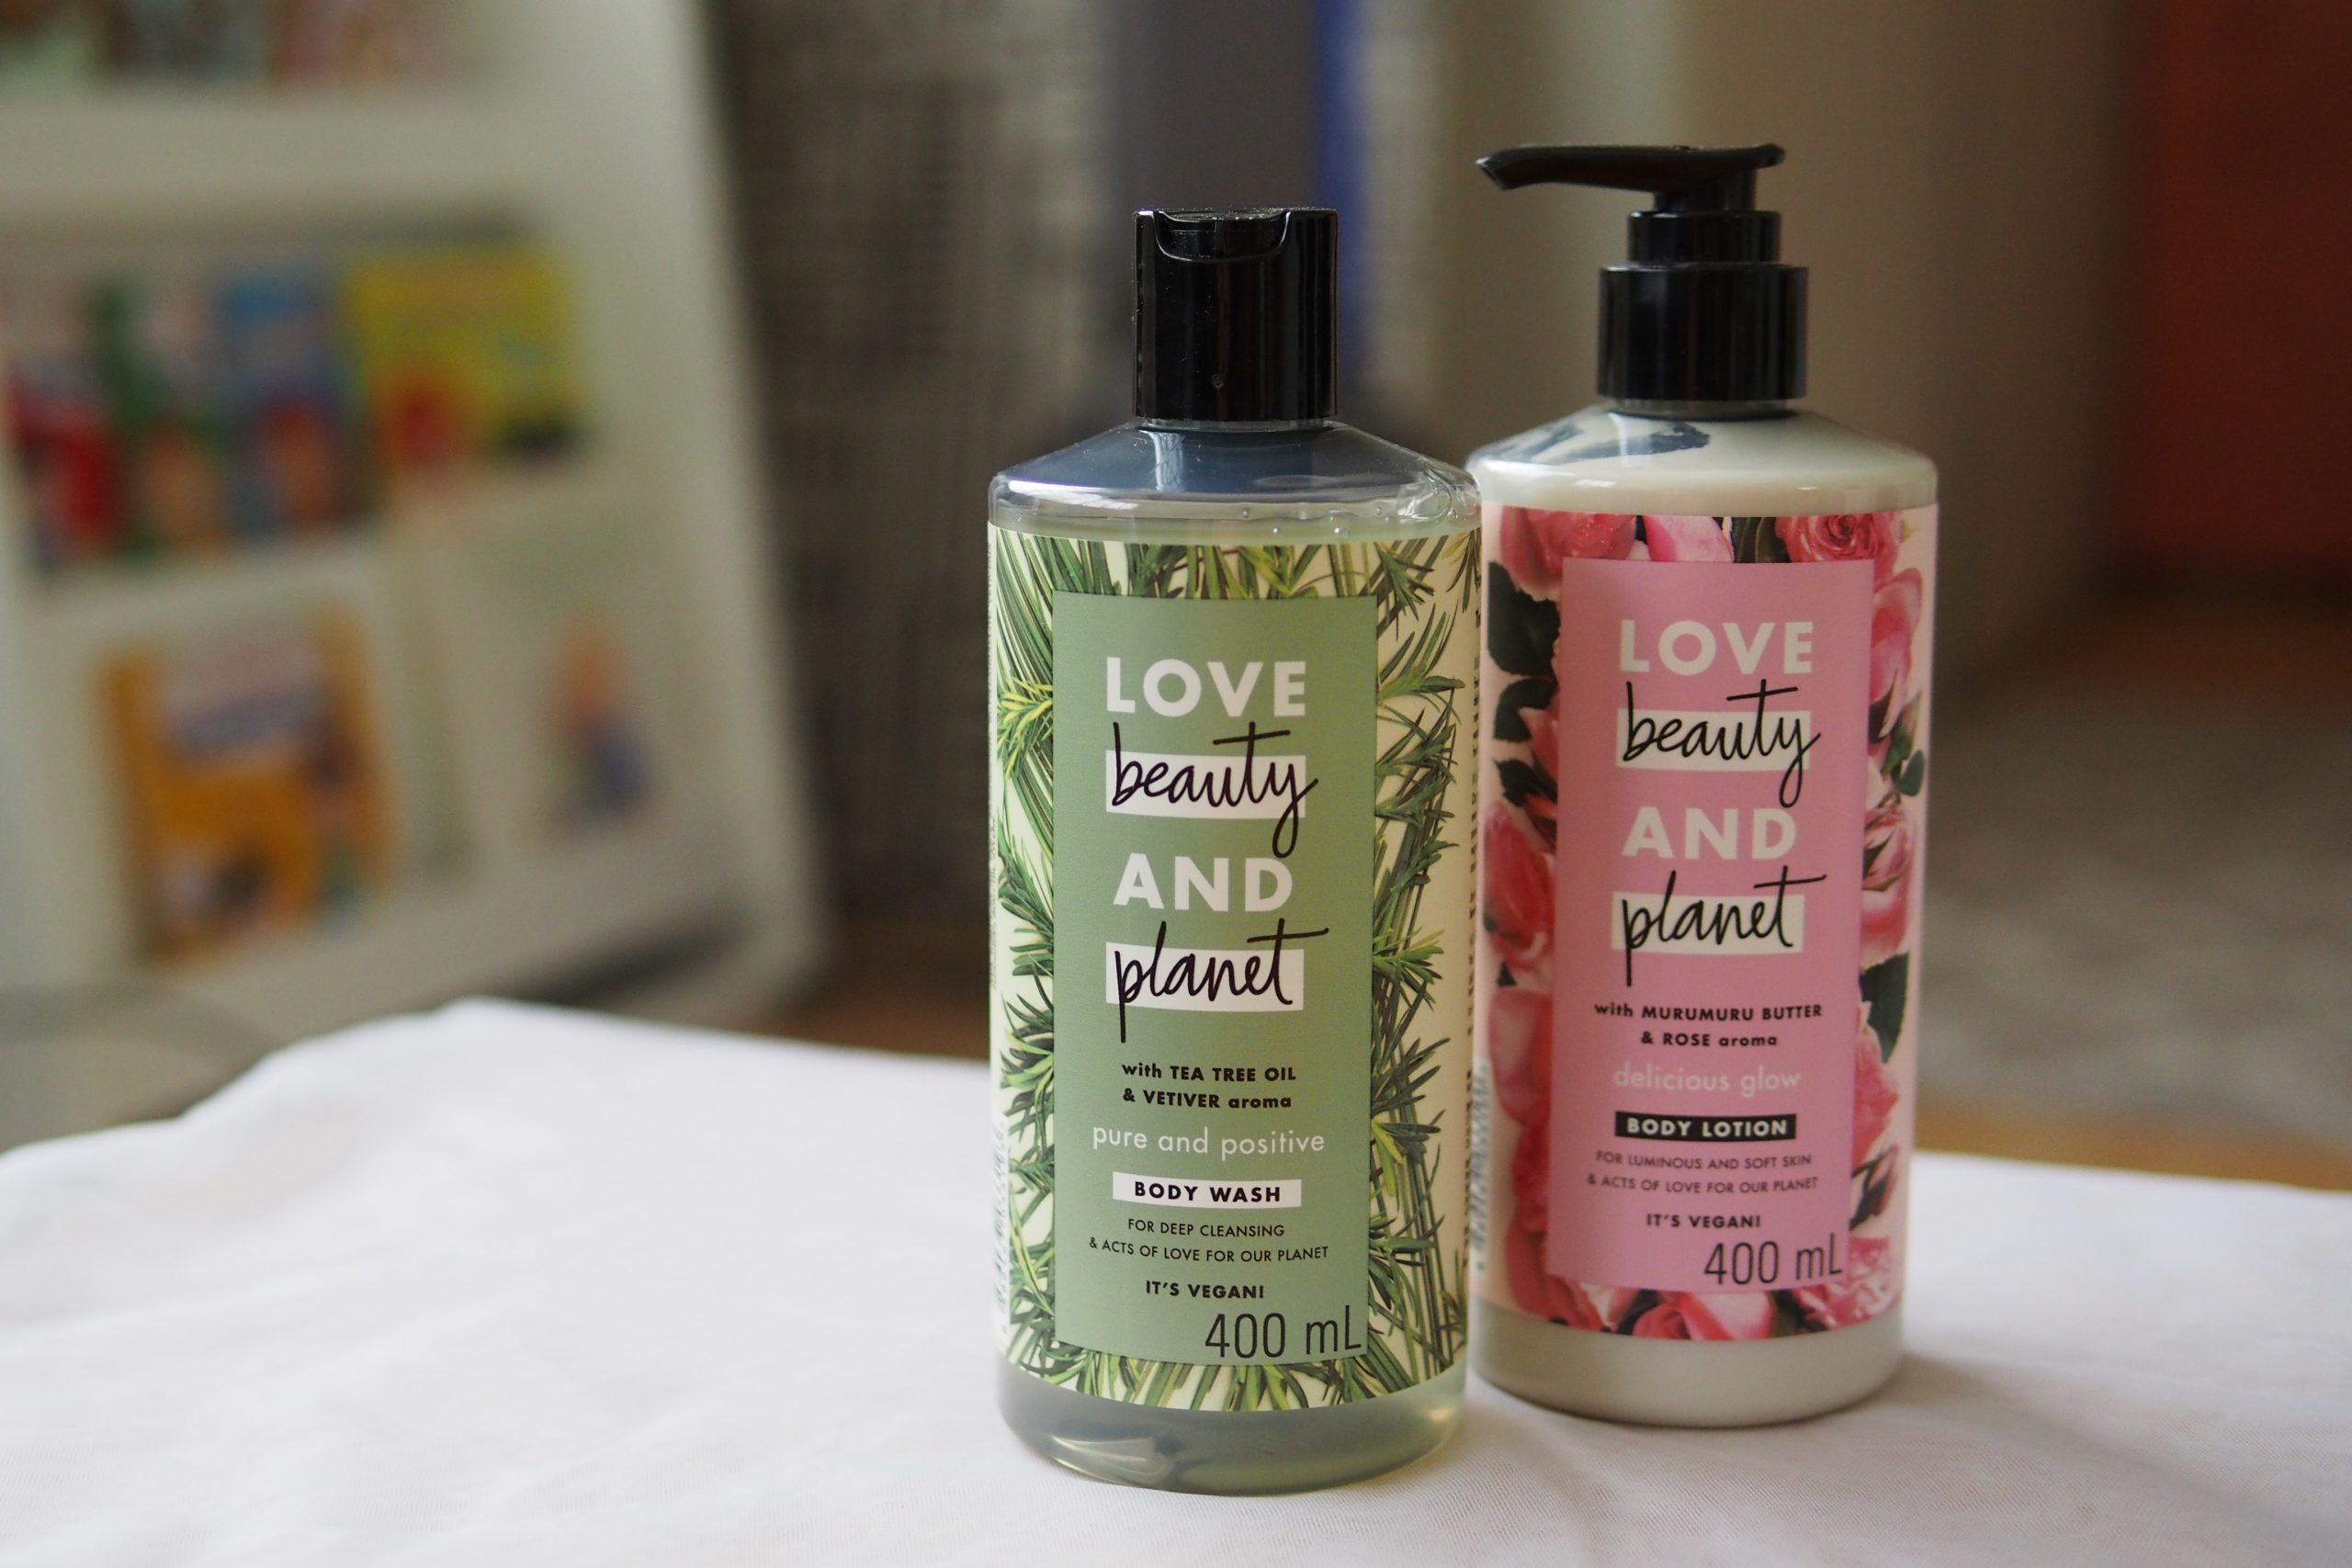 Beauty Review: Love Beauty and Planet joins Shopee’s Shop Green campaign